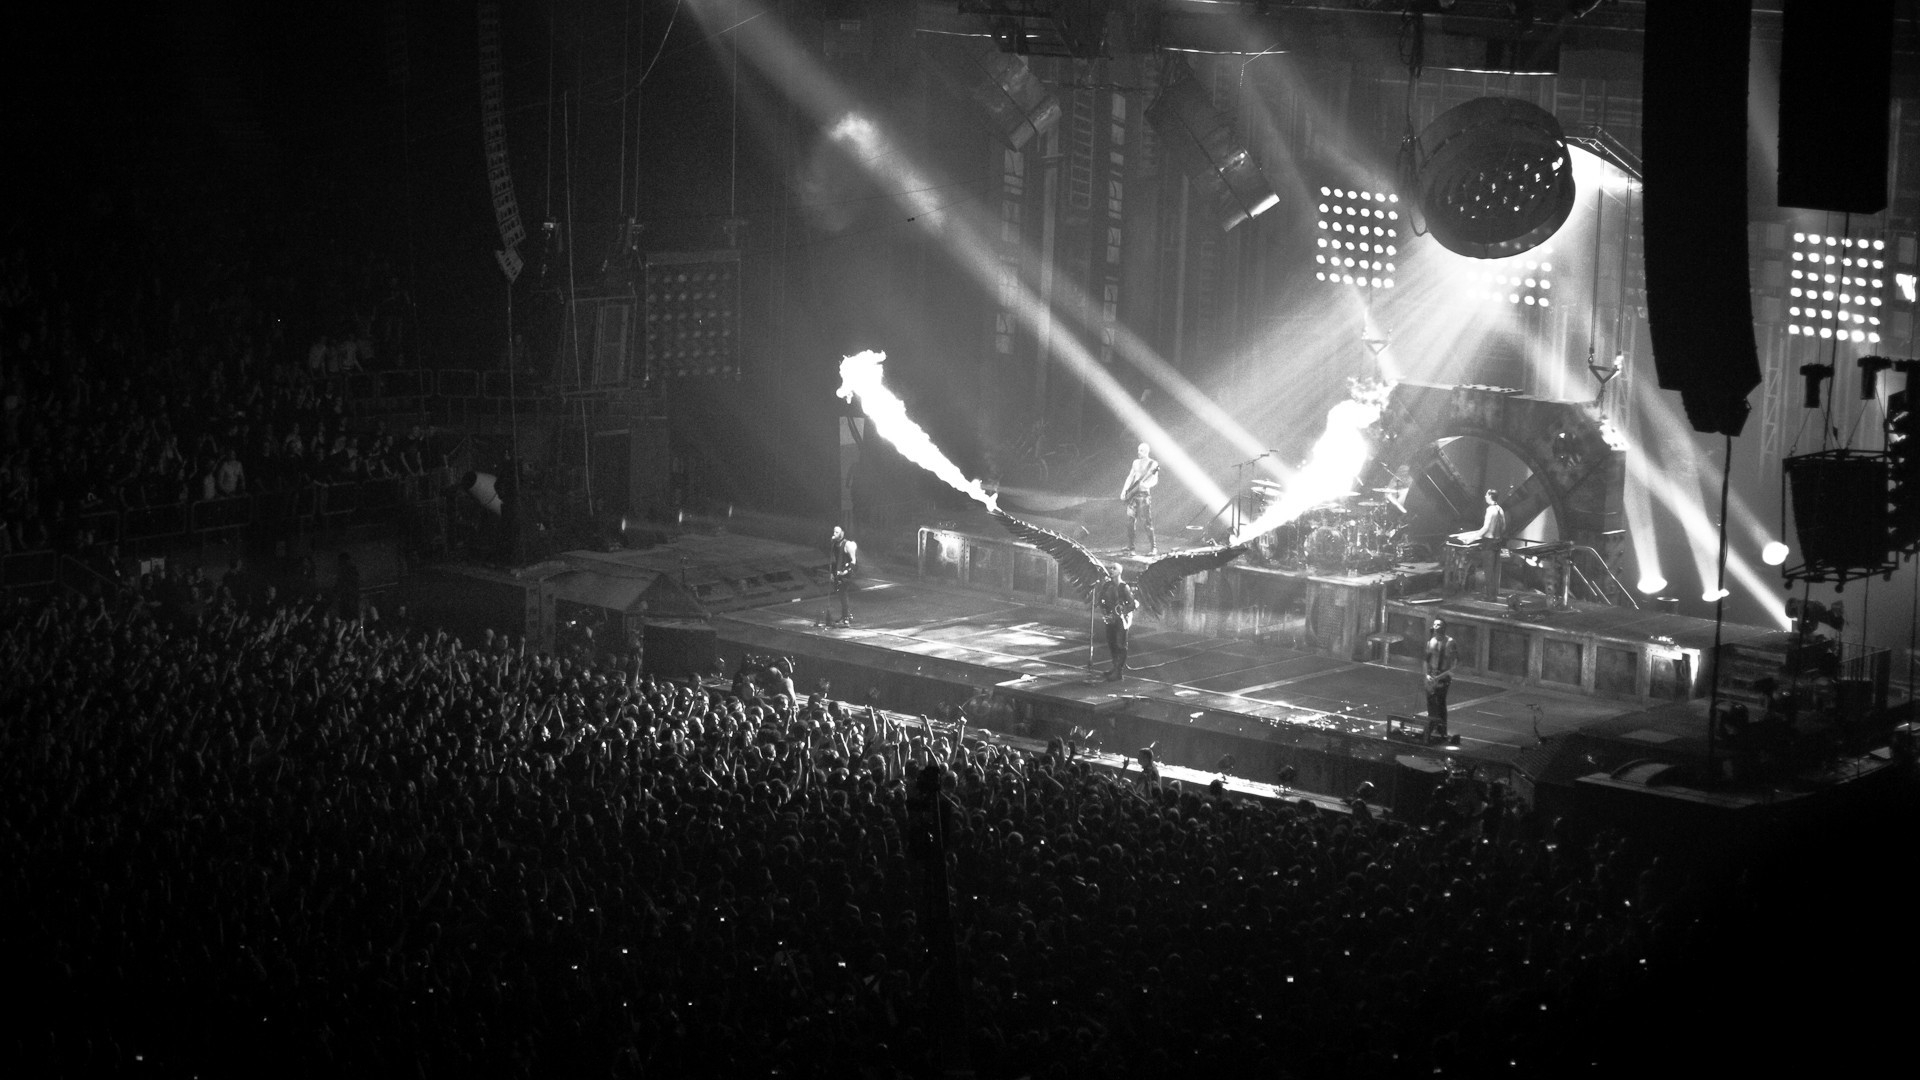 1920x1080 Download wallpaper fire, scene, wings, black and white, concert, metal, the audience, rammstein, section music in resoluti